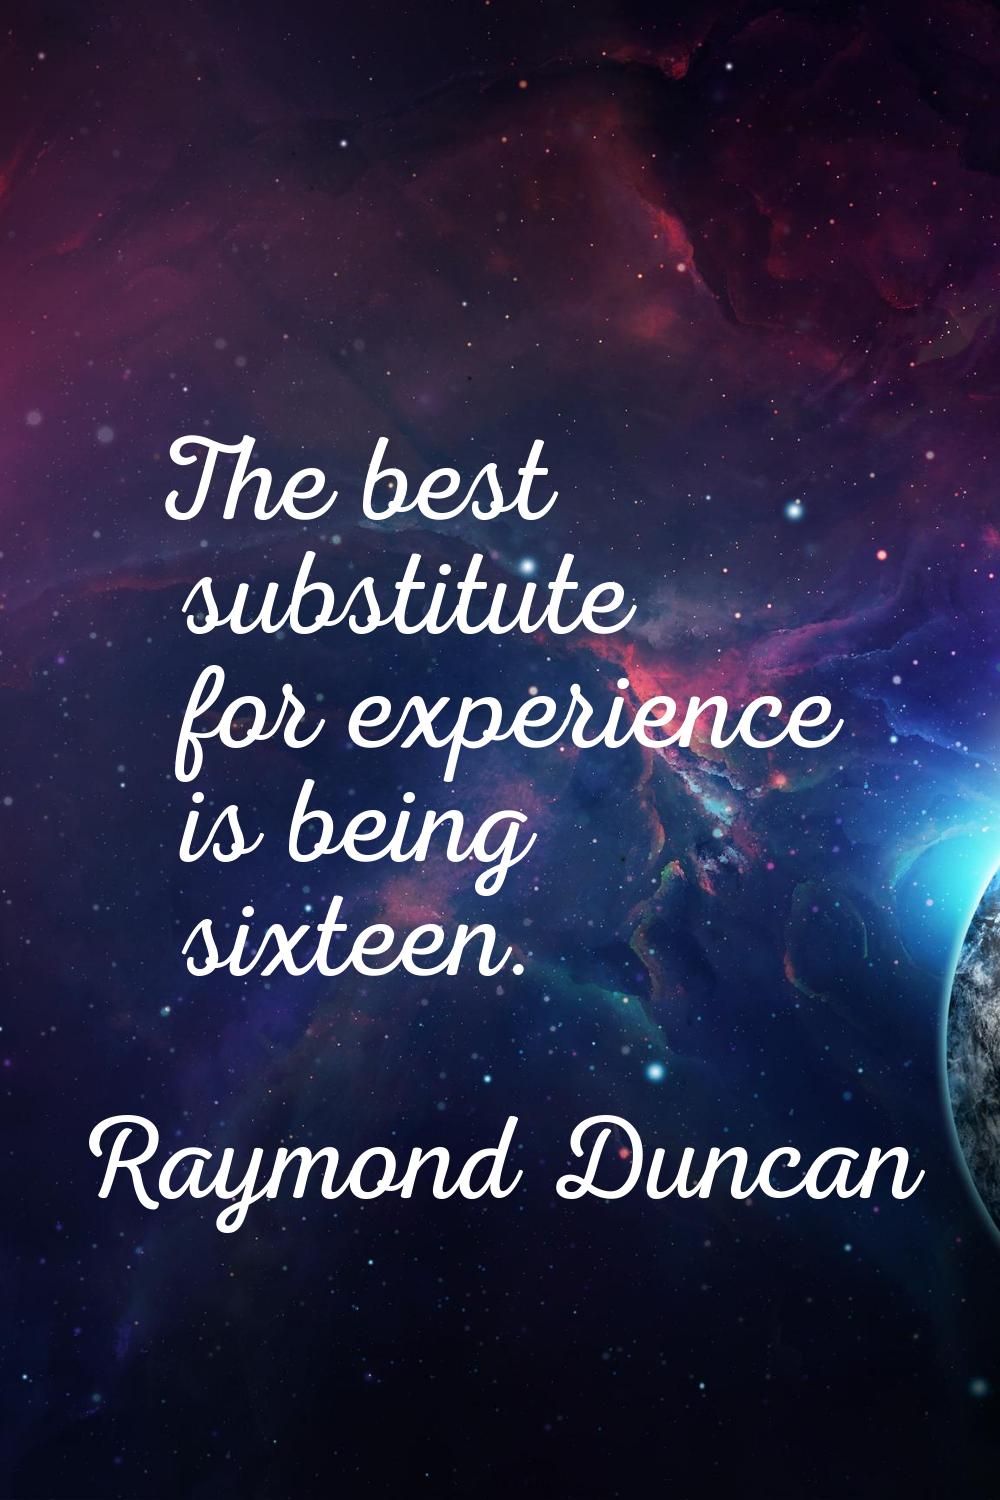 The best substitute for experience is being sixteen.